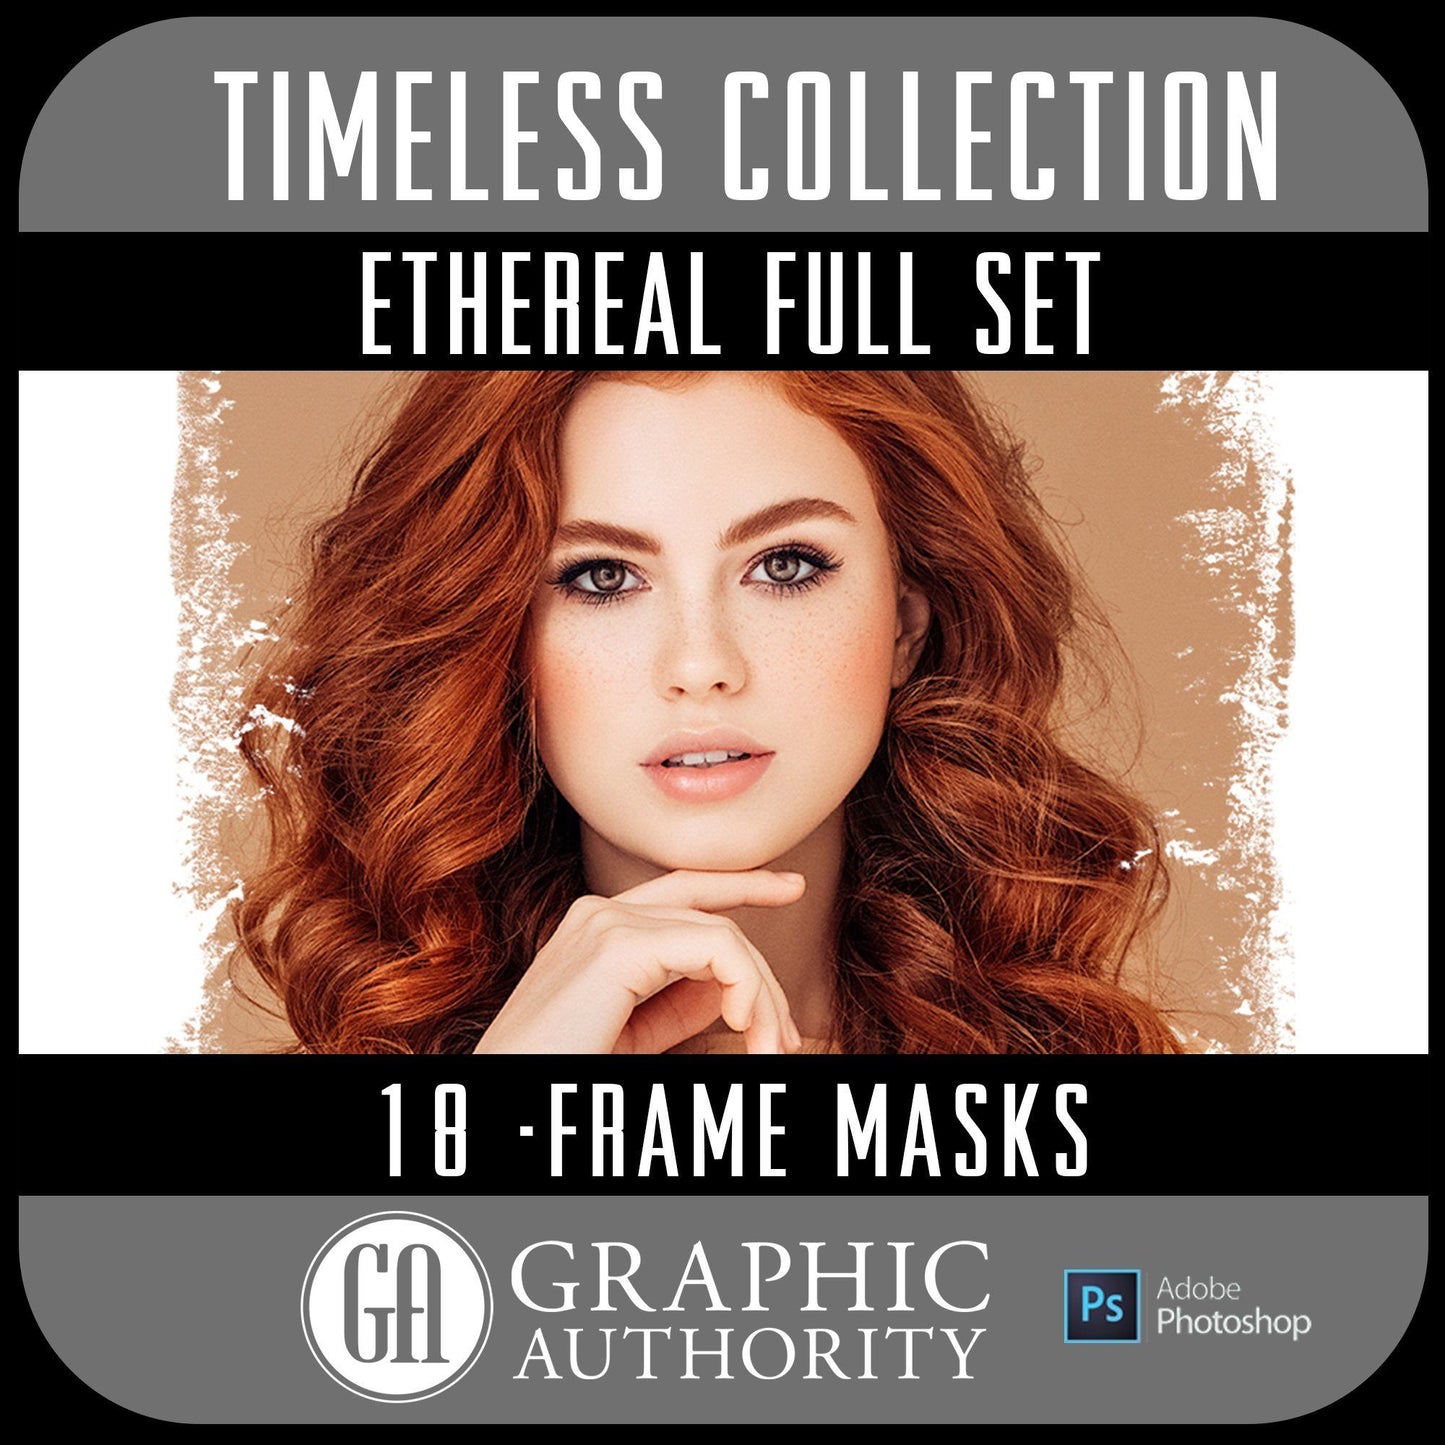 Timeless - Ethereal Image Masks - Full Collection-Photoshop Template - Graphic Authority